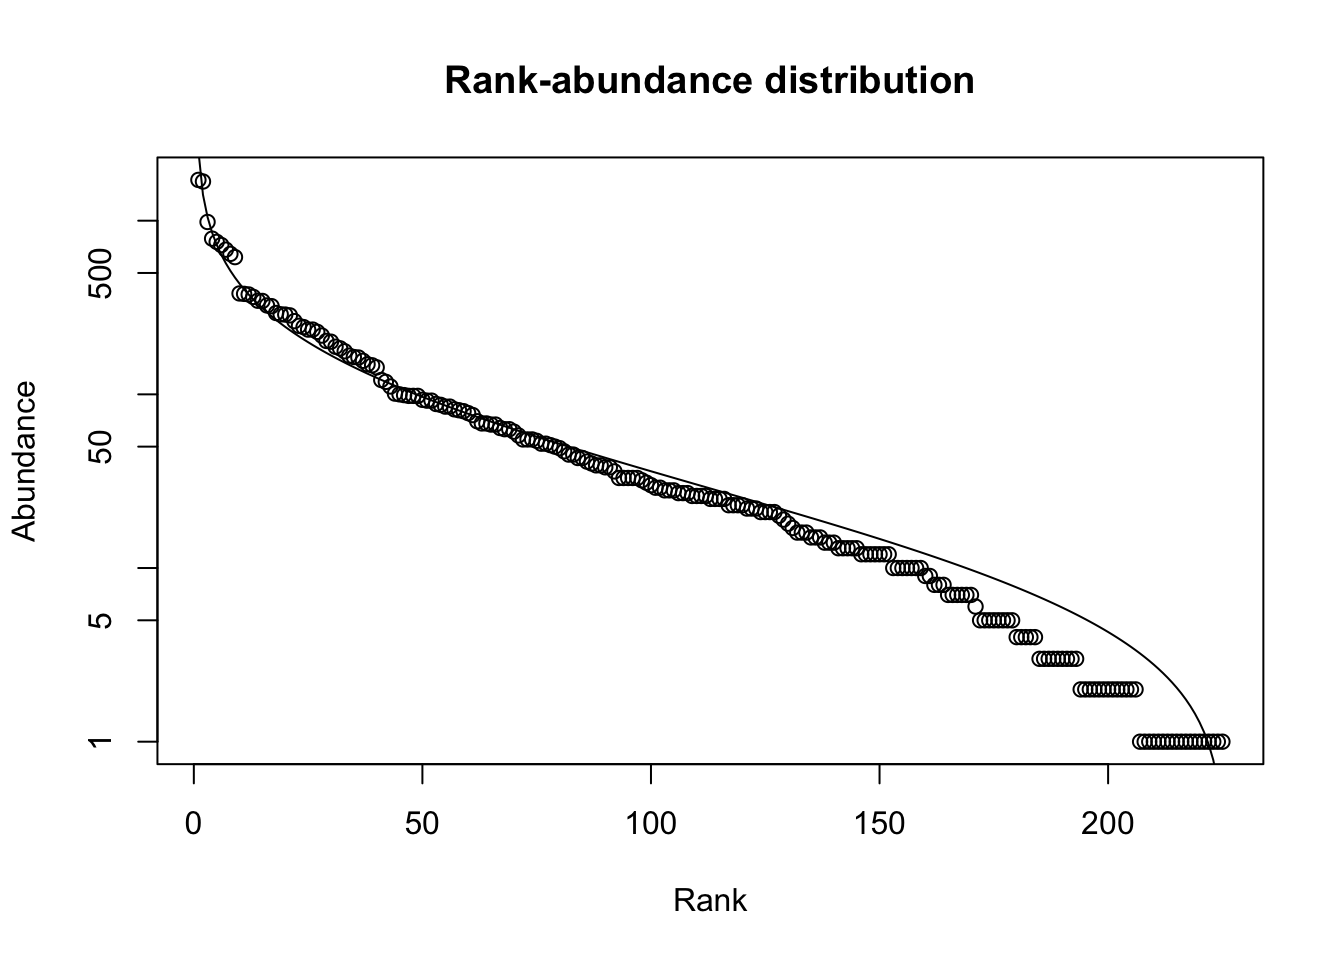 Rank abundance distribution of tree species in a 50 ha plot on Barro Colorado Island. Line is a best fit of the log-normal distribution.